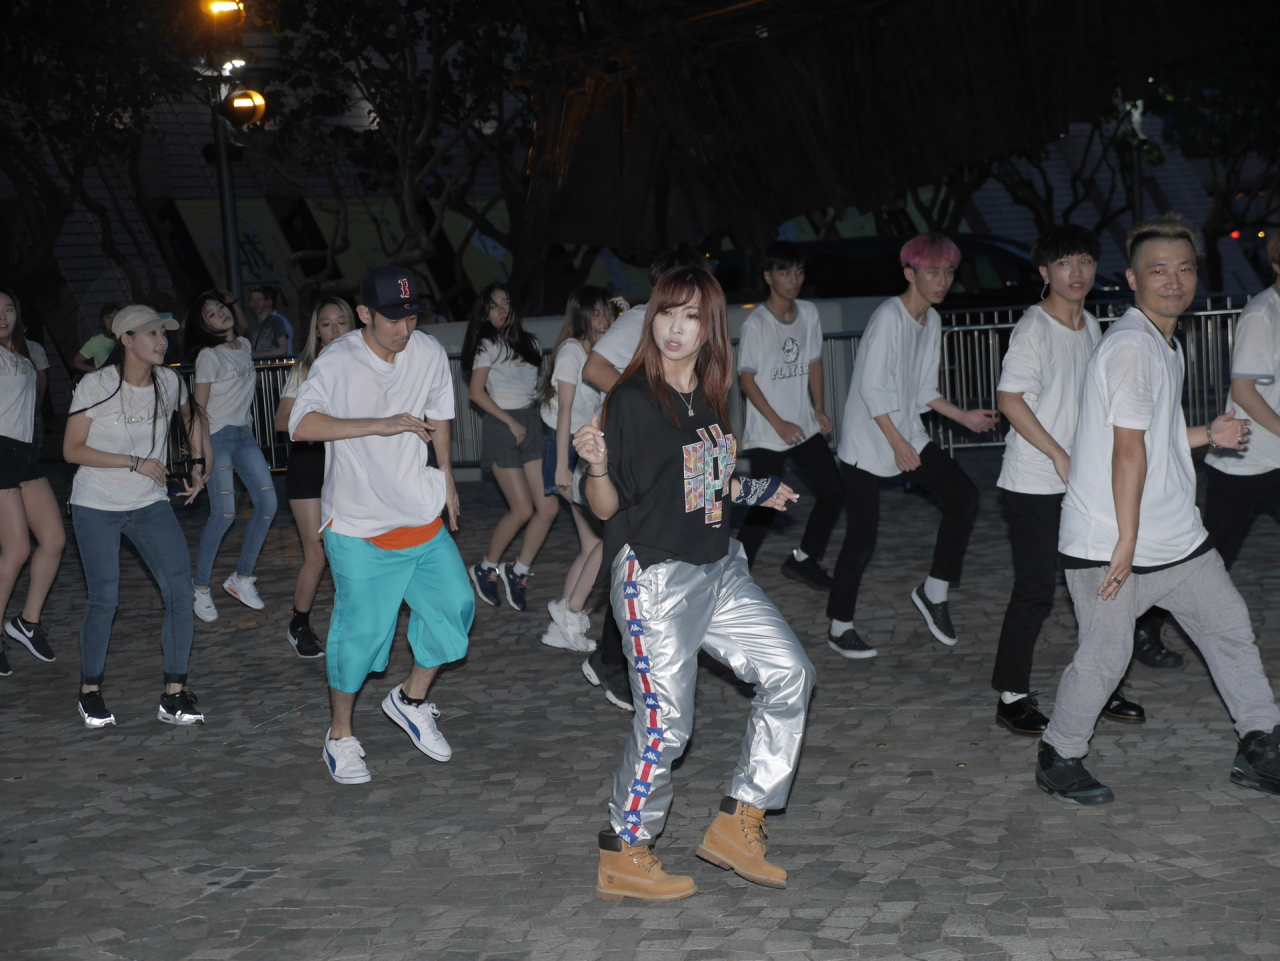 Minzy (center) of 2NE1 appears in a flash mob dance with FJDC director Kenny Ng Ka-wai (far right) in the Tsim Sha Tsui district in Hong Kong in September 2017. (Courtesy of HK01)